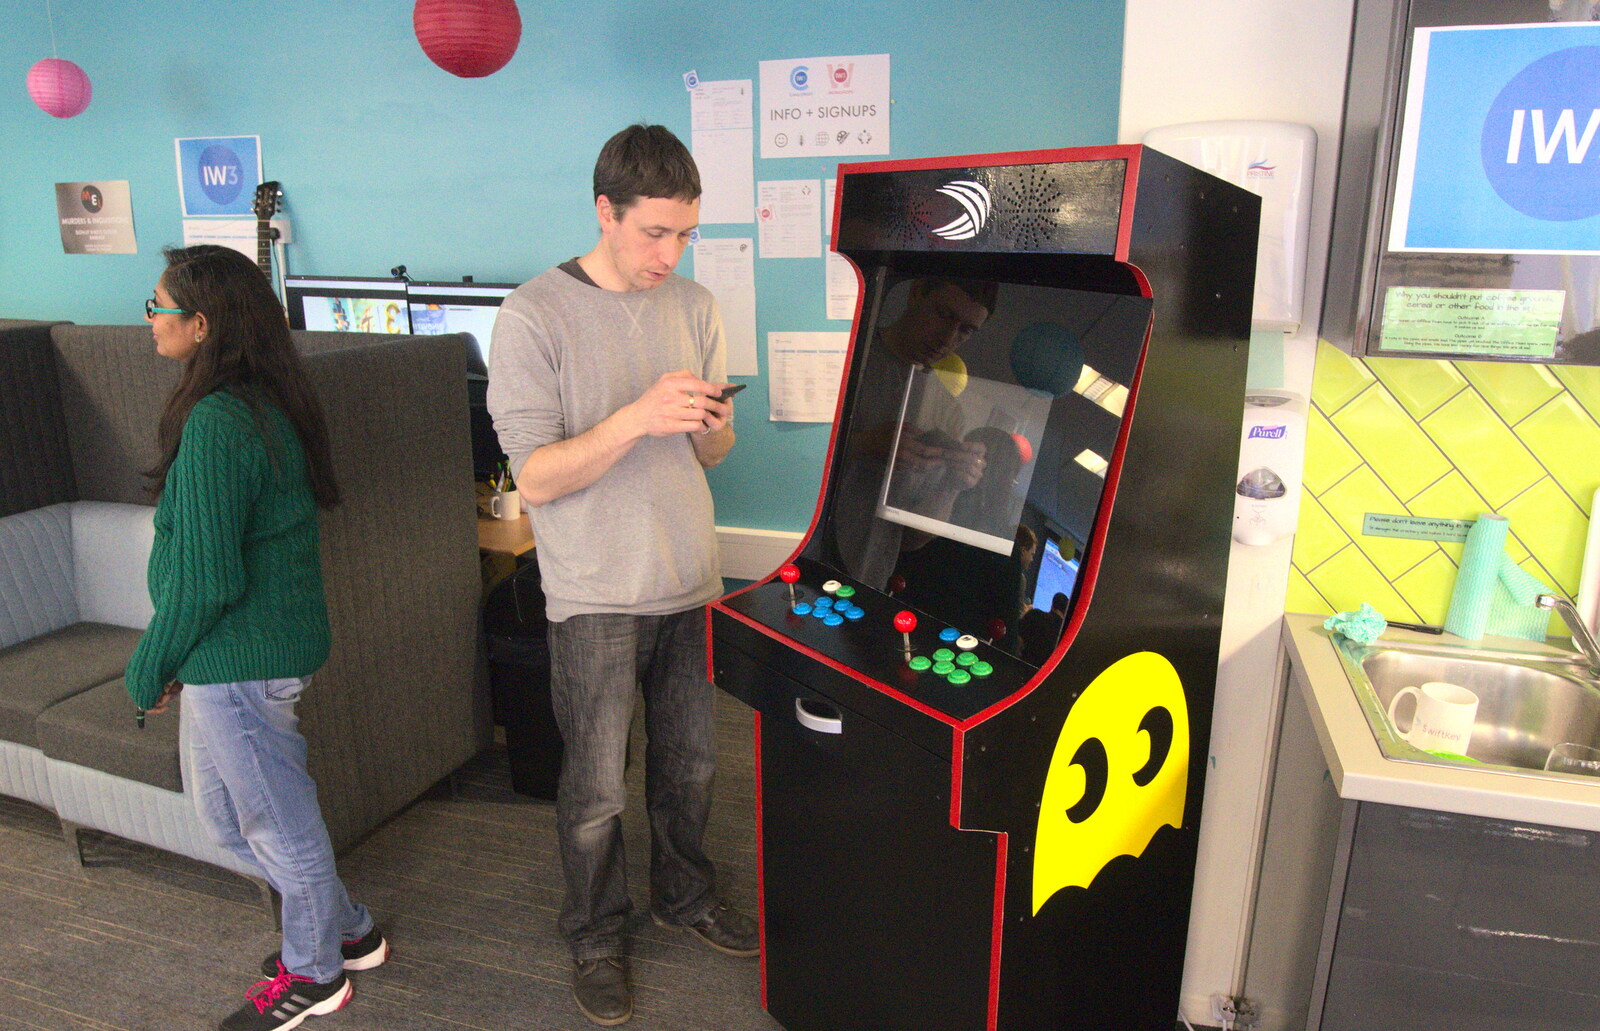 The arcade cabinet from a few innovations ago from A SwiftKey Innovation Week, Southwark, London - 22nd April 2016